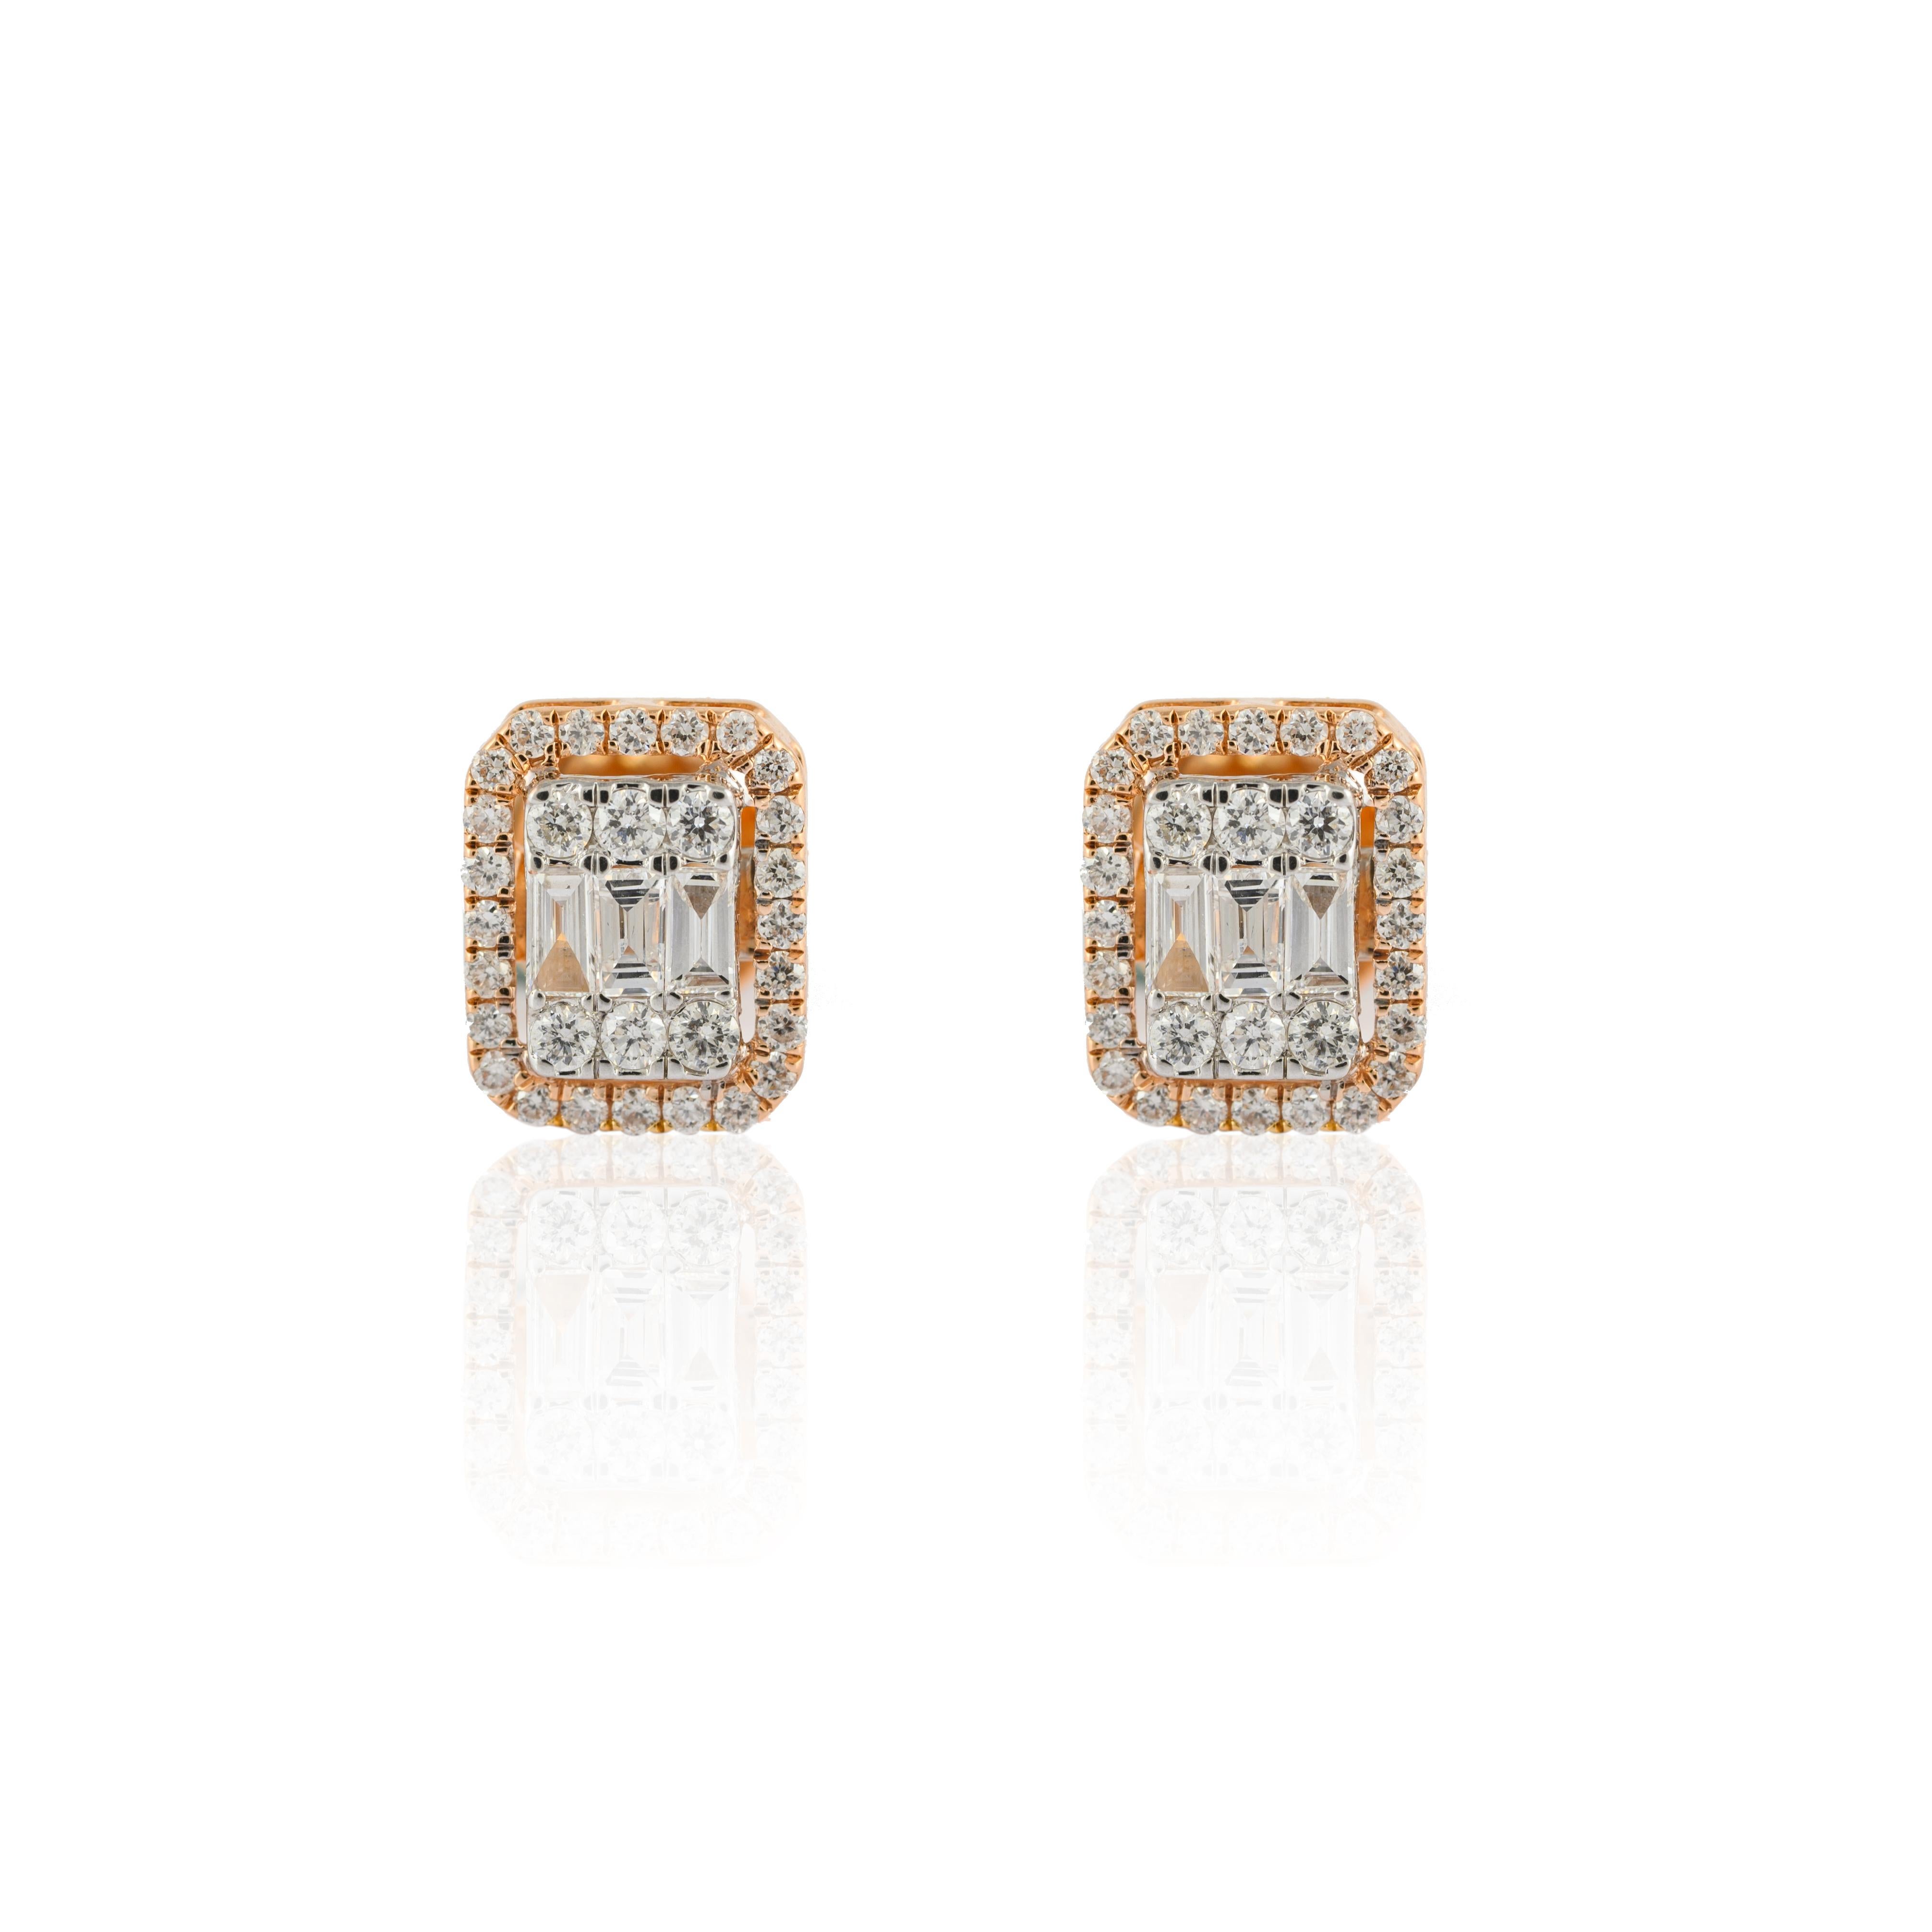 Brilliant Diamond Pushback Stud Earrings in 18K Gold to make a statement with your look. You shall need stud earrings to make a statement with your look. These earrings create a sparkling, luxurious look featuring round cut diamonds.
April